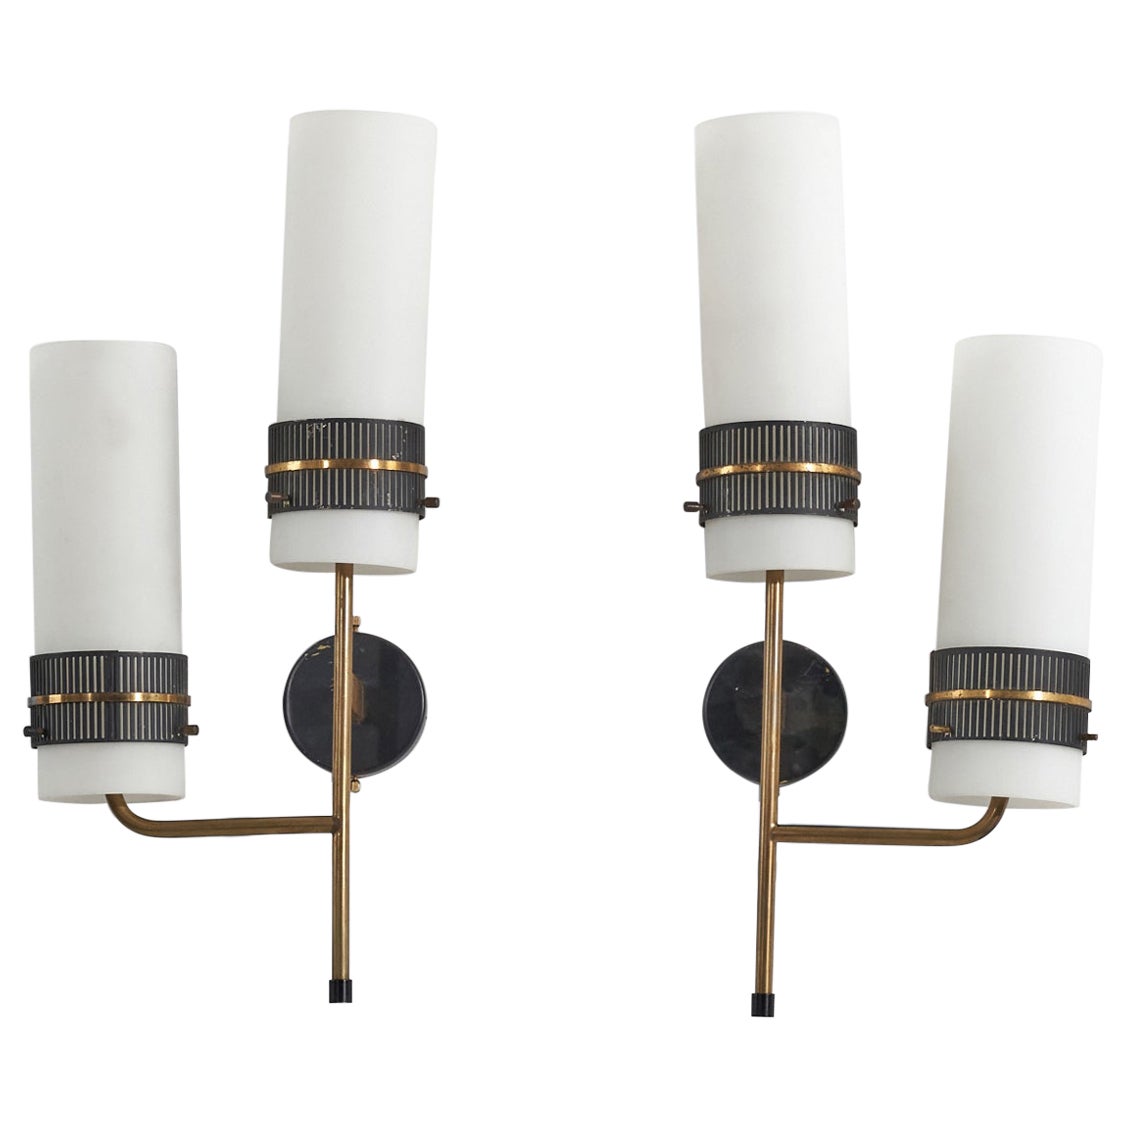 Italian Designer, Wall Lights, Brass, Metal And Glass, Italy, c. 1950s For Sale